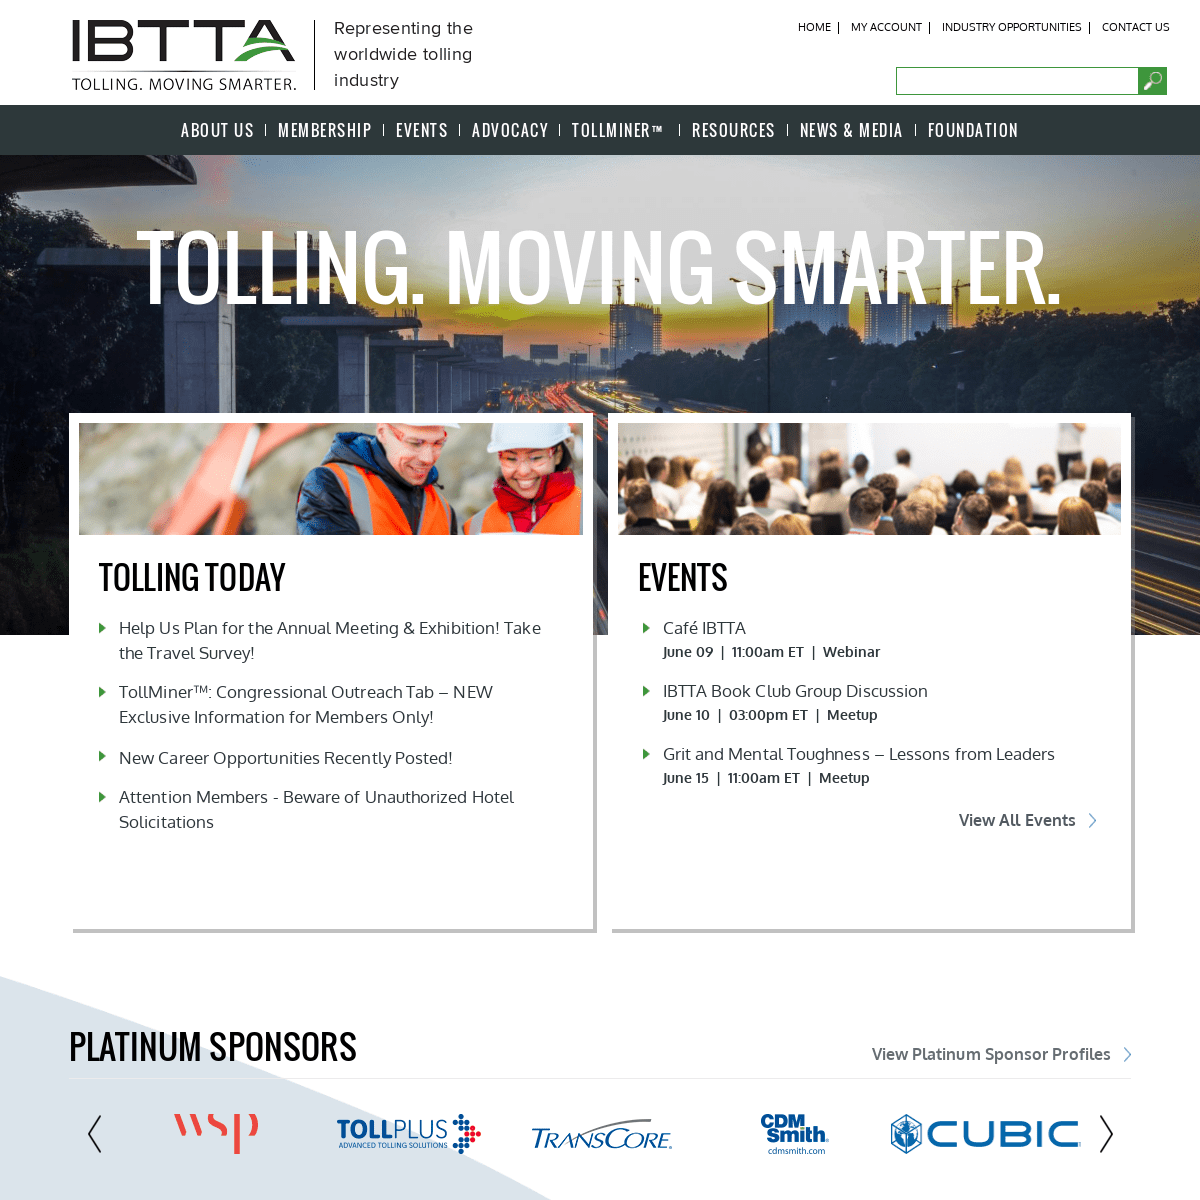 A complete backup of https://ibtta.org